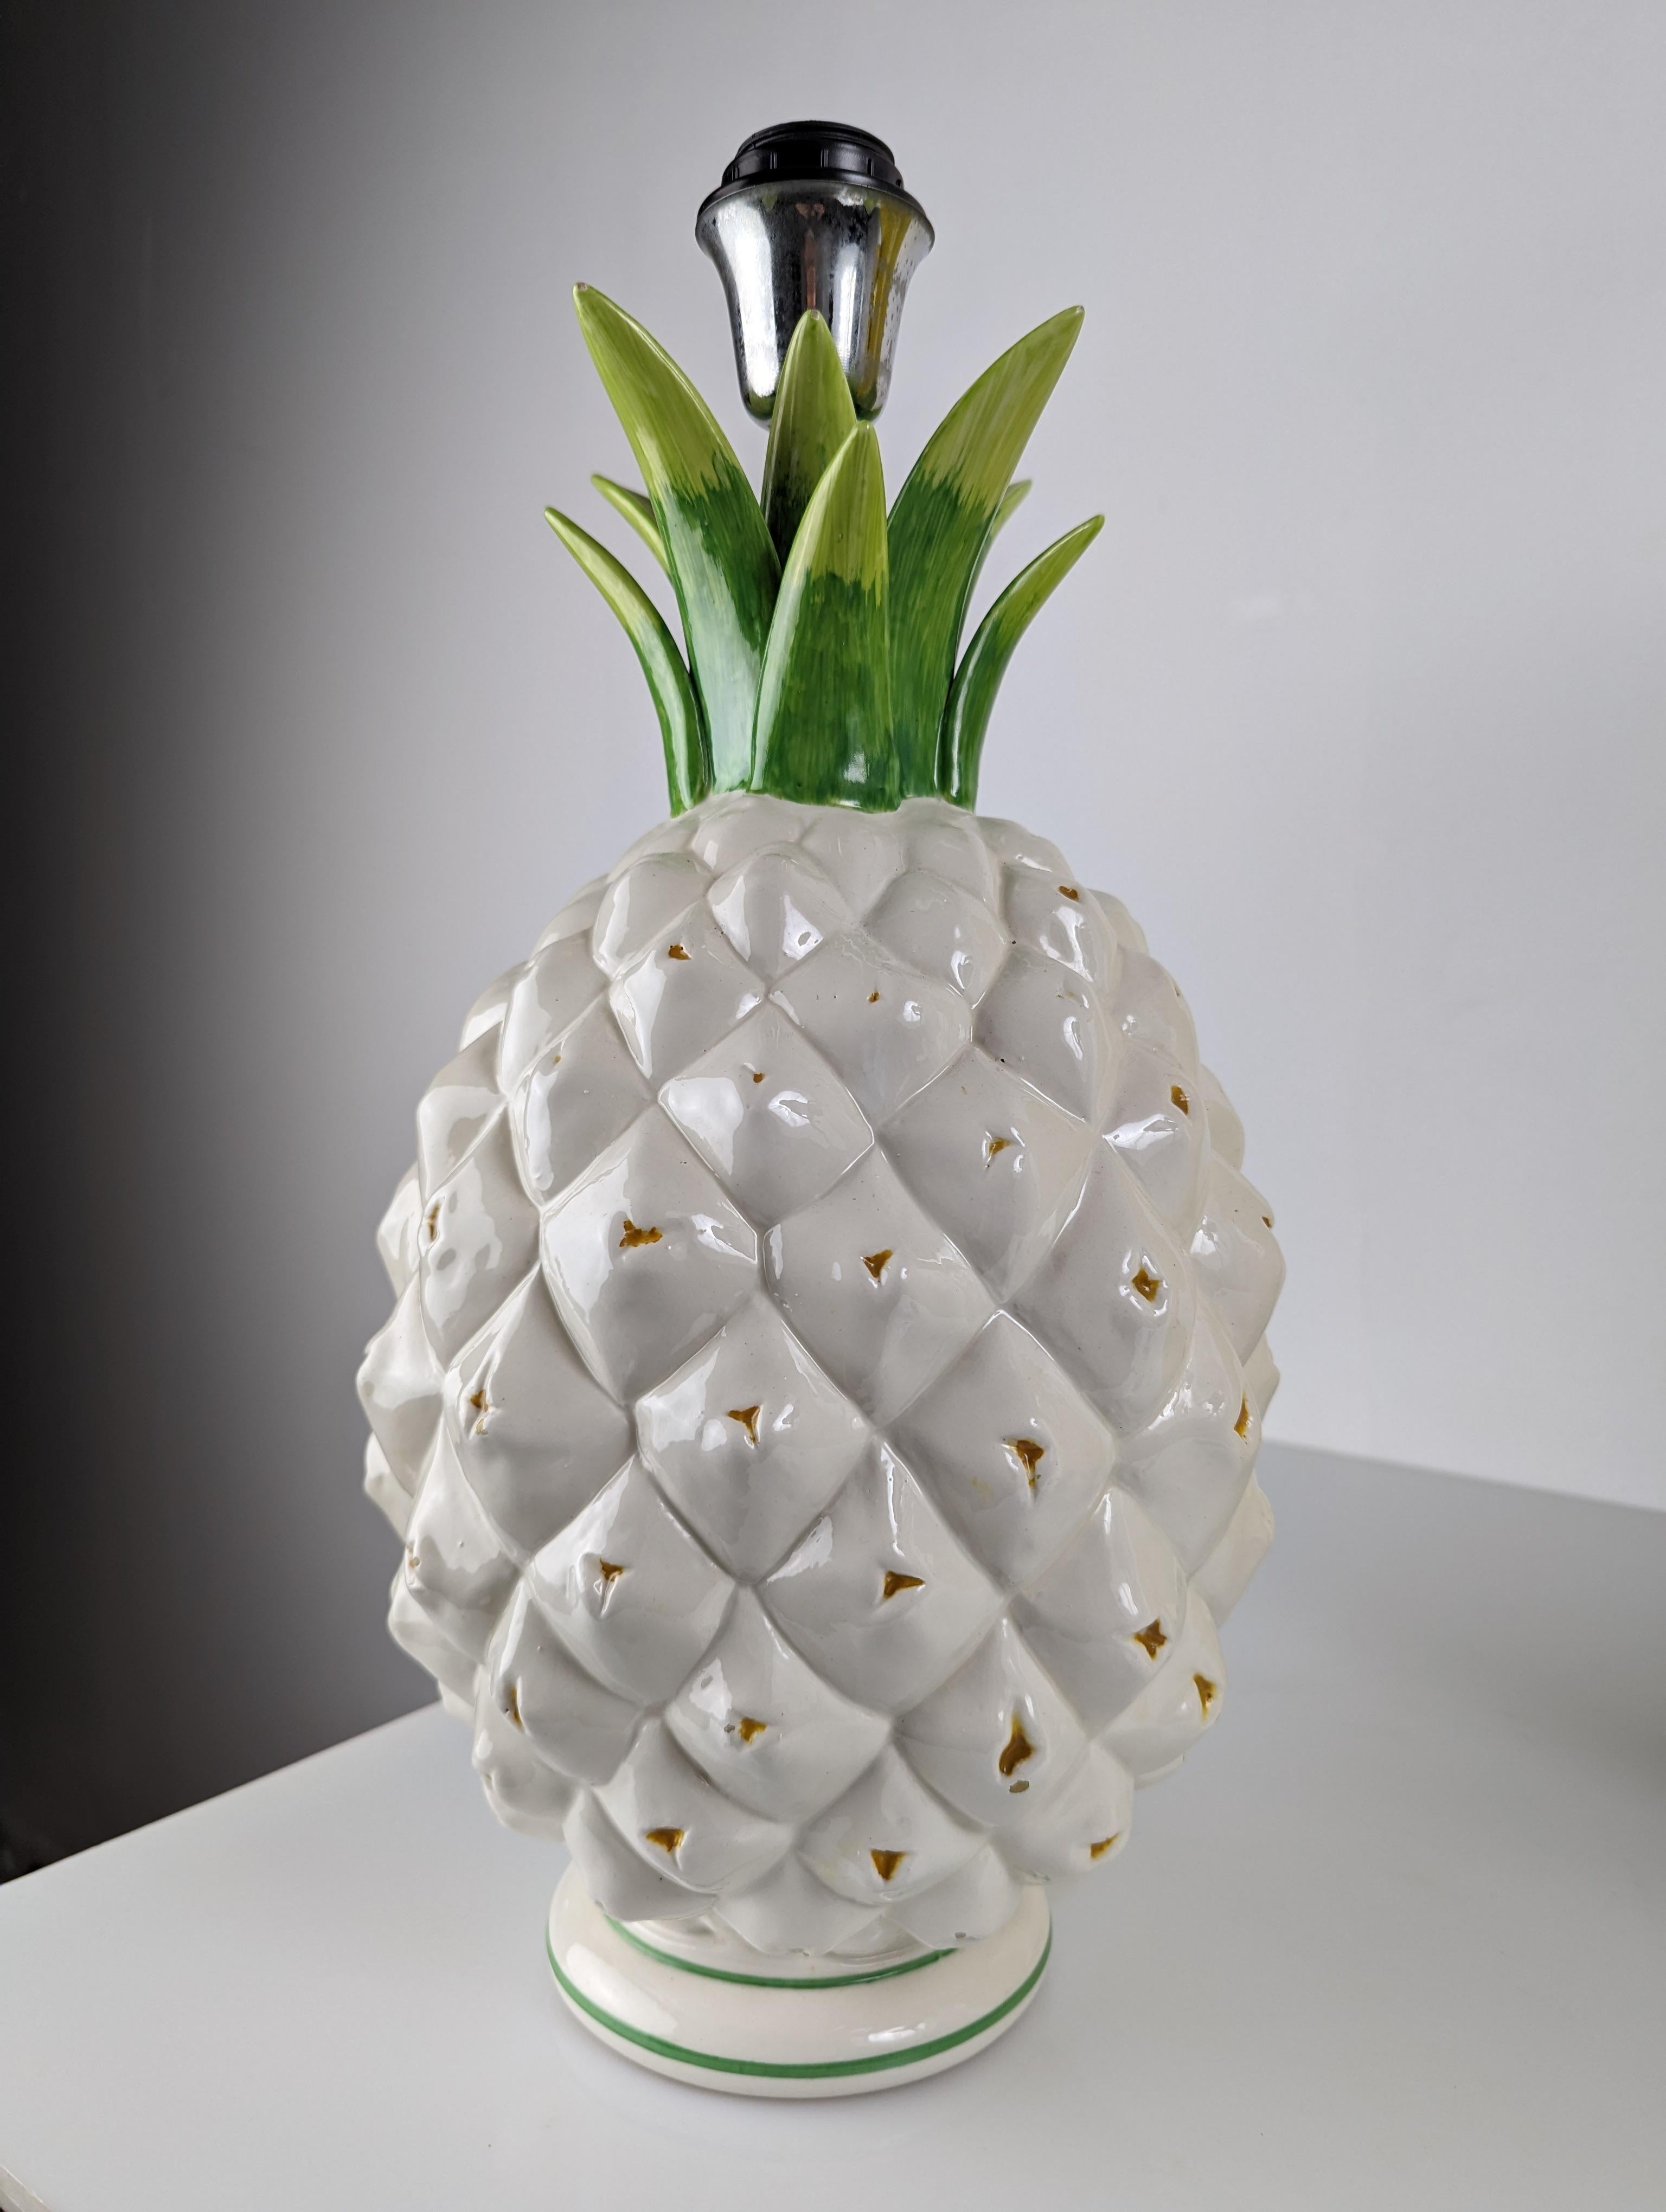 Pineapple lamp made of white, green ceramic and yellow details.